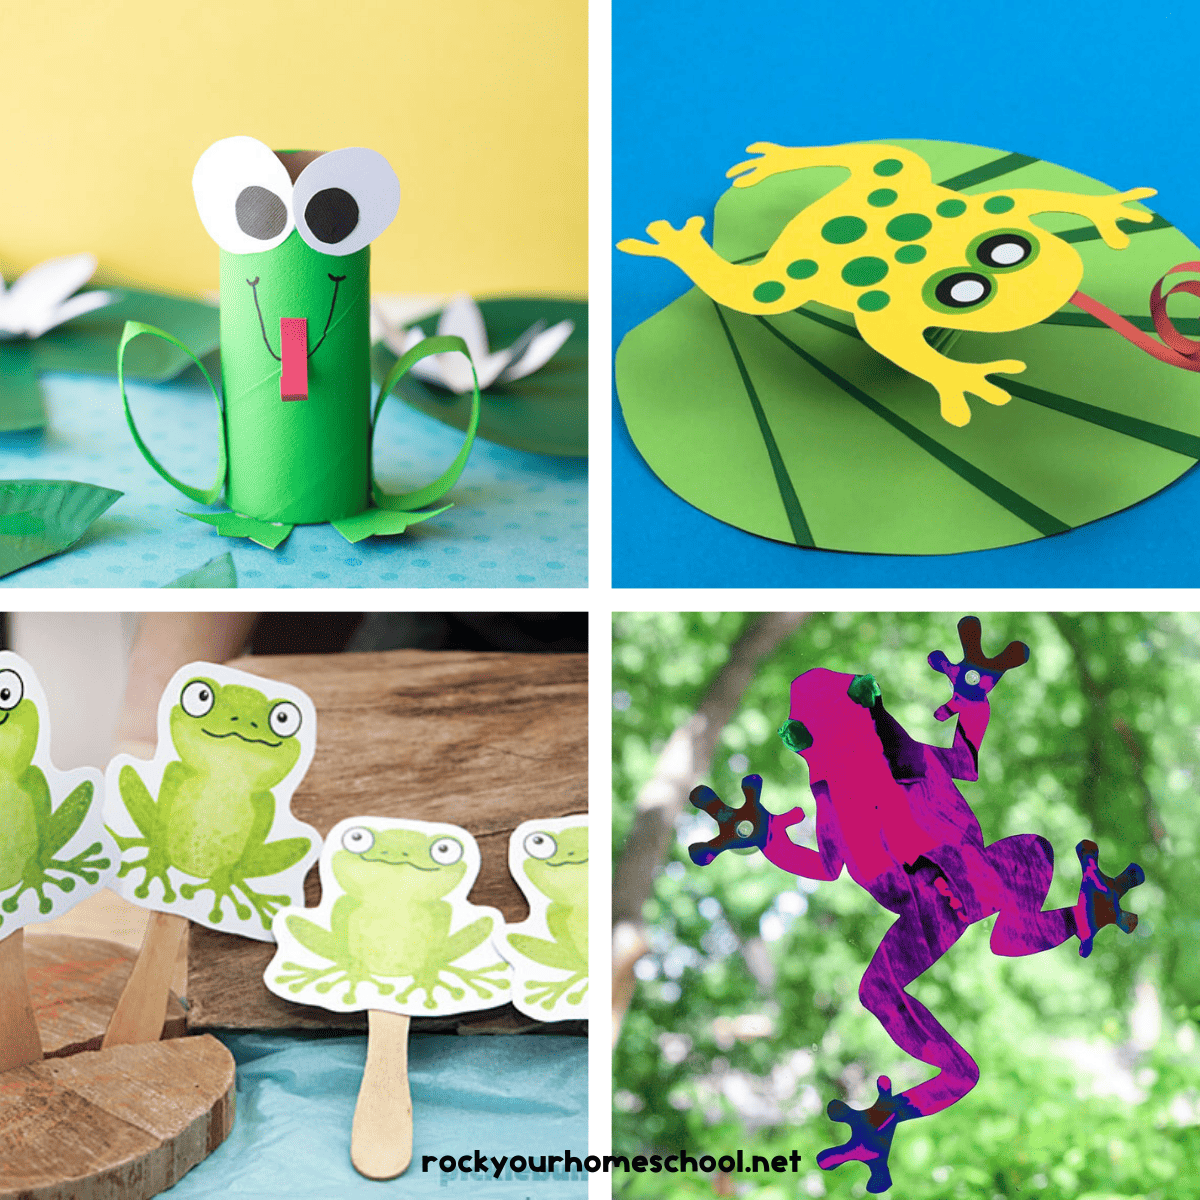 Four frog crafts for kids with toilet paper roll frog, paper frog on lily pad, paper frog puppets, and climbing tree frog craft.